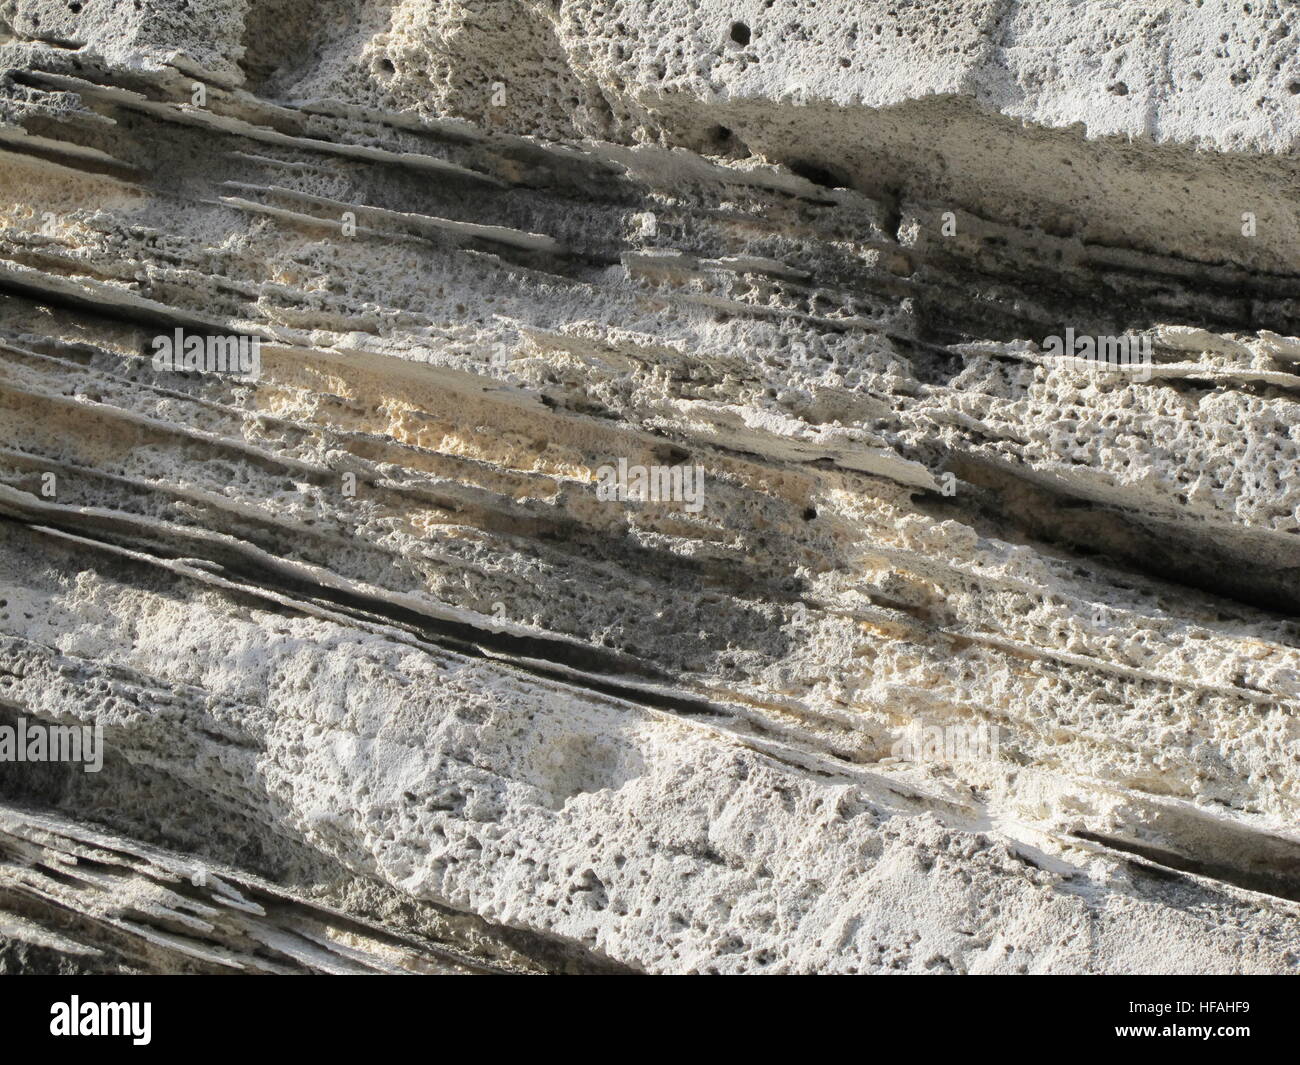 Close up of lime stone showing the different layers of the rock, Bermuda Stock Photo